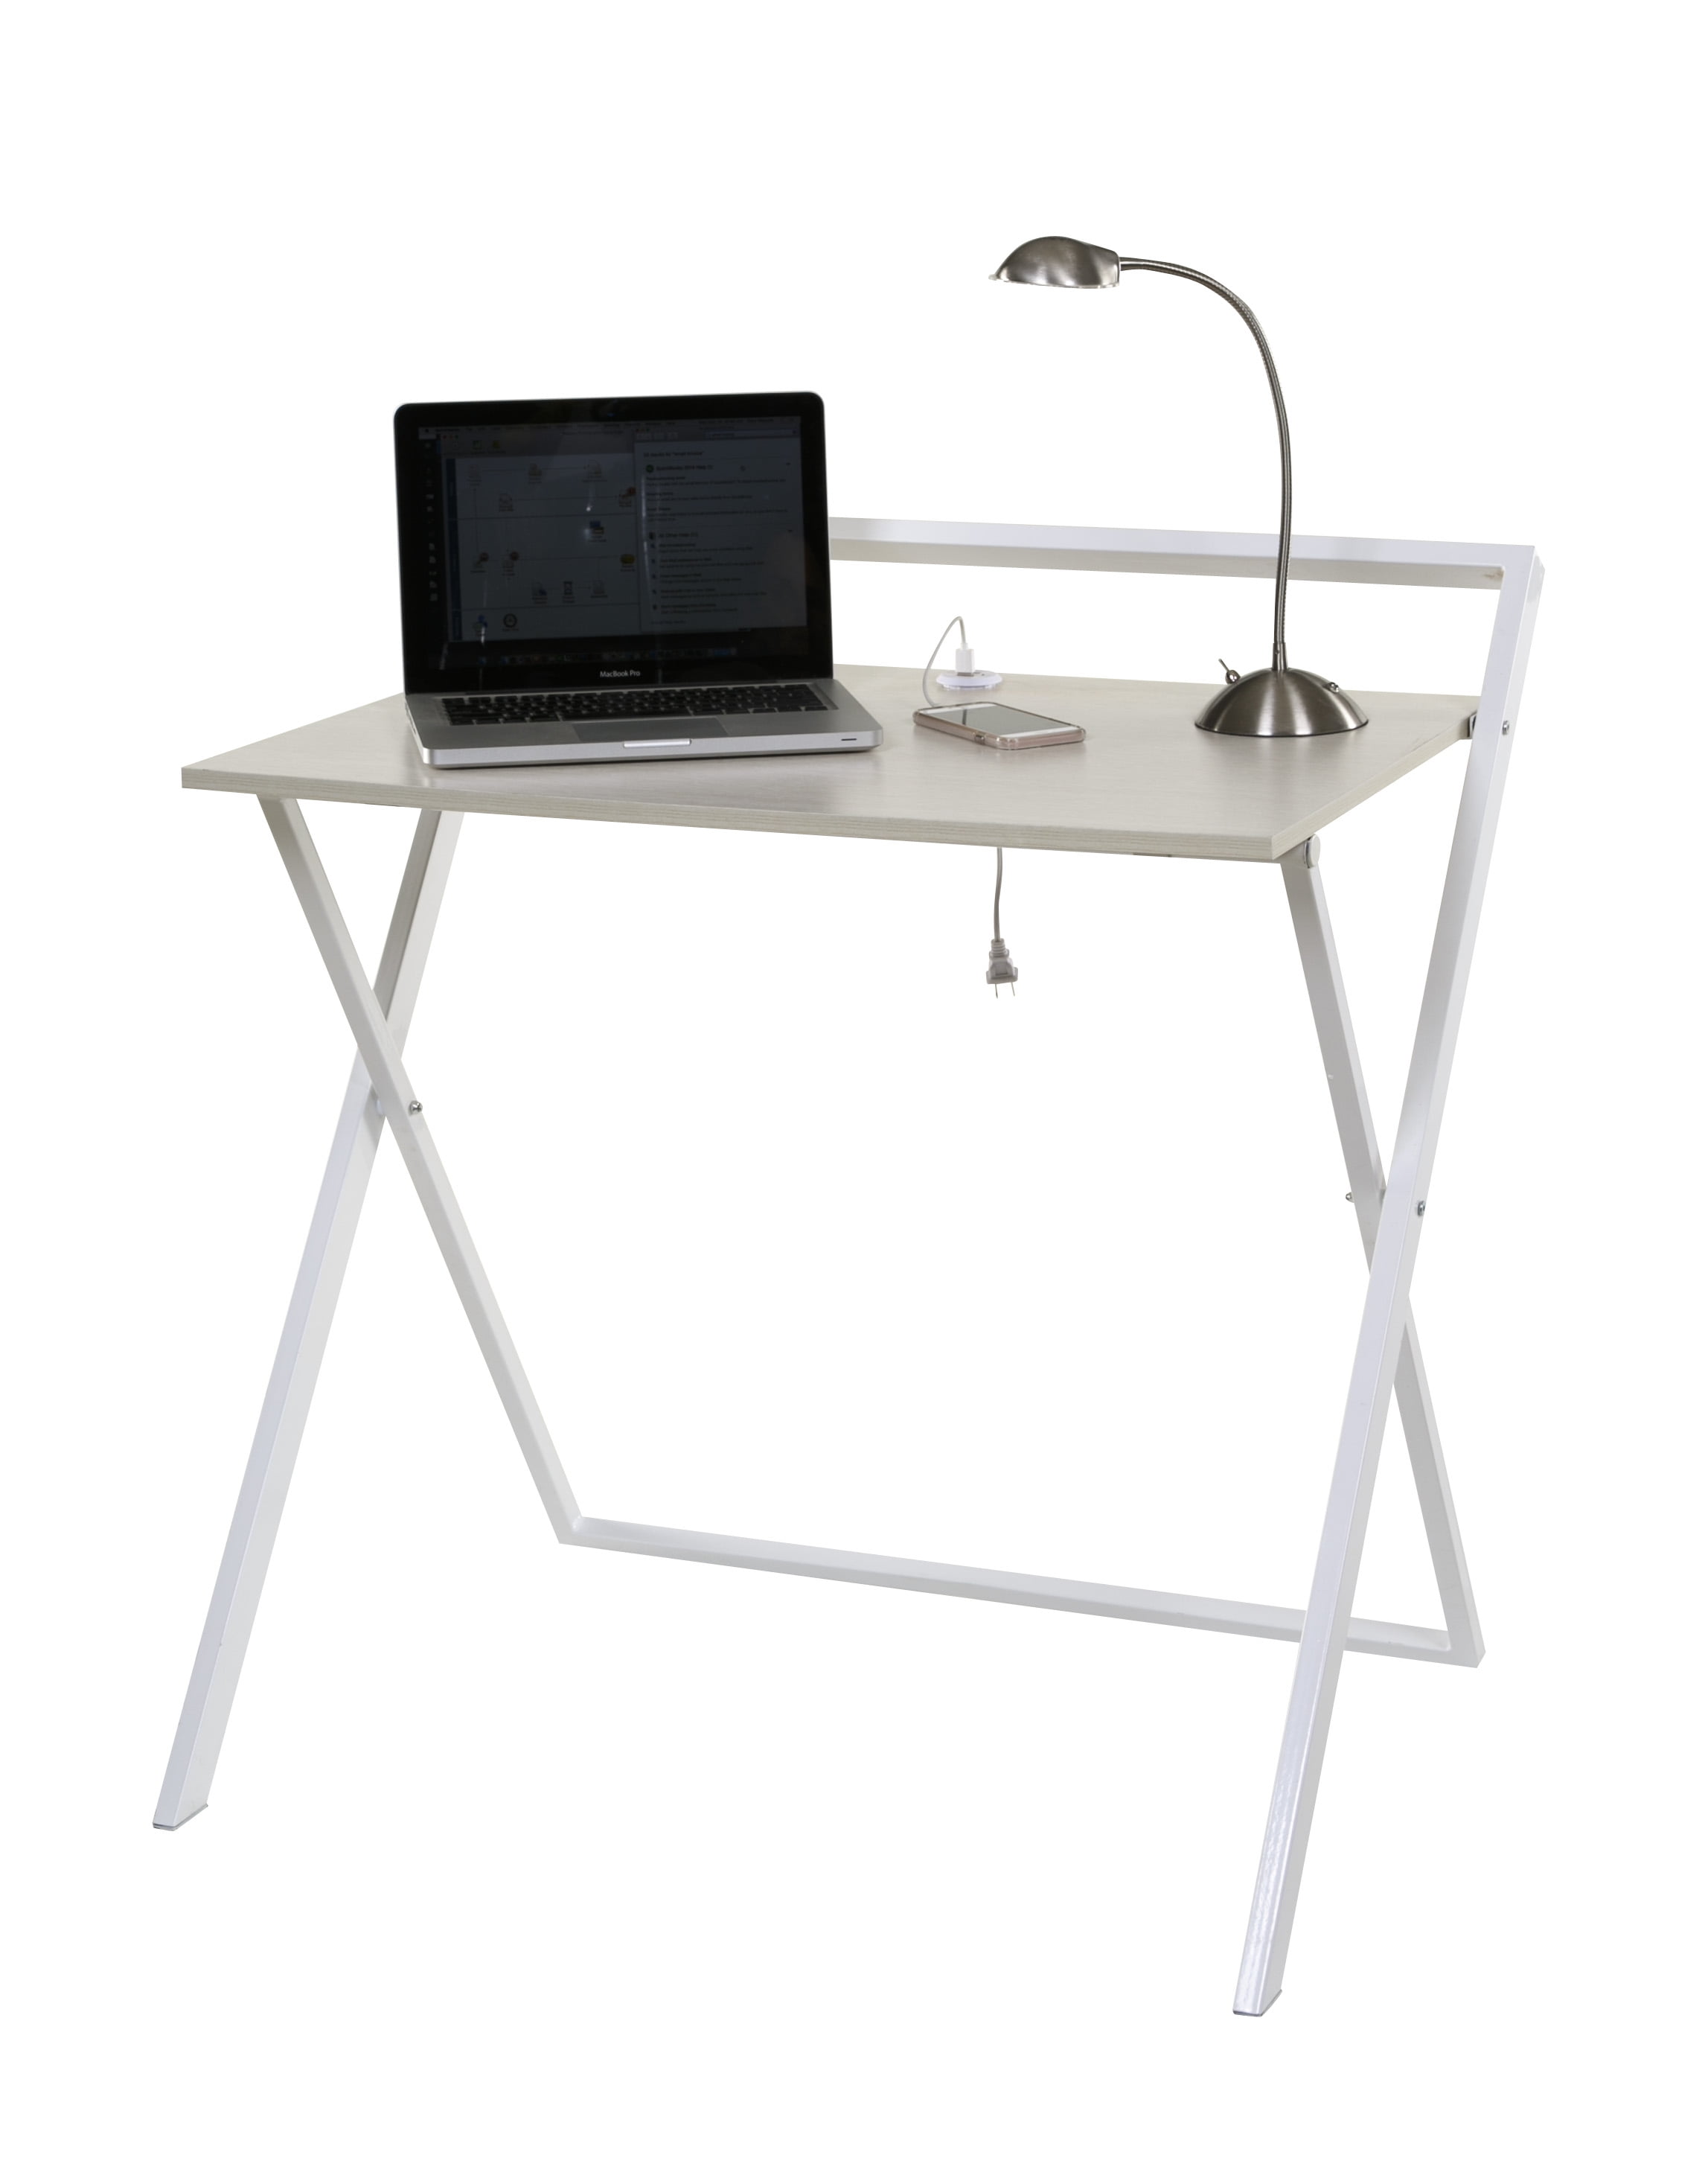 Comfort Products 50-1020qa01 34.75 X 32.25 X 24.5 In. No Assembly Folding Desk With Dual Usb Charger, Whitewashed Oak & White